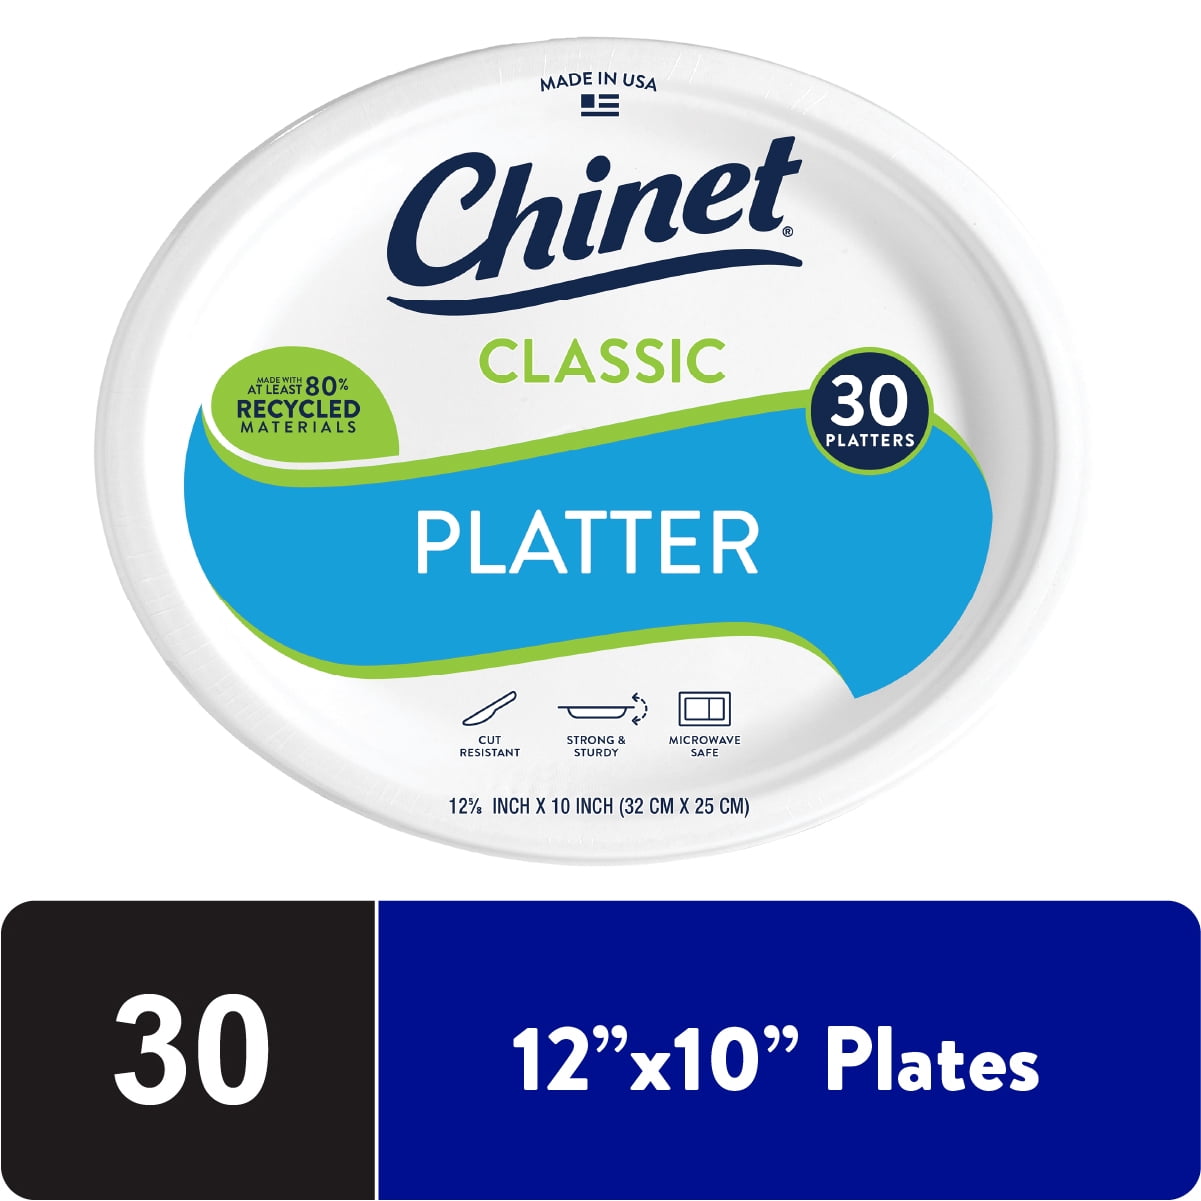 Chinet Classic White, Round All Occasion Fiber Plates, 8.75 Inch, 100 Count  – Falak And Sheru LLC